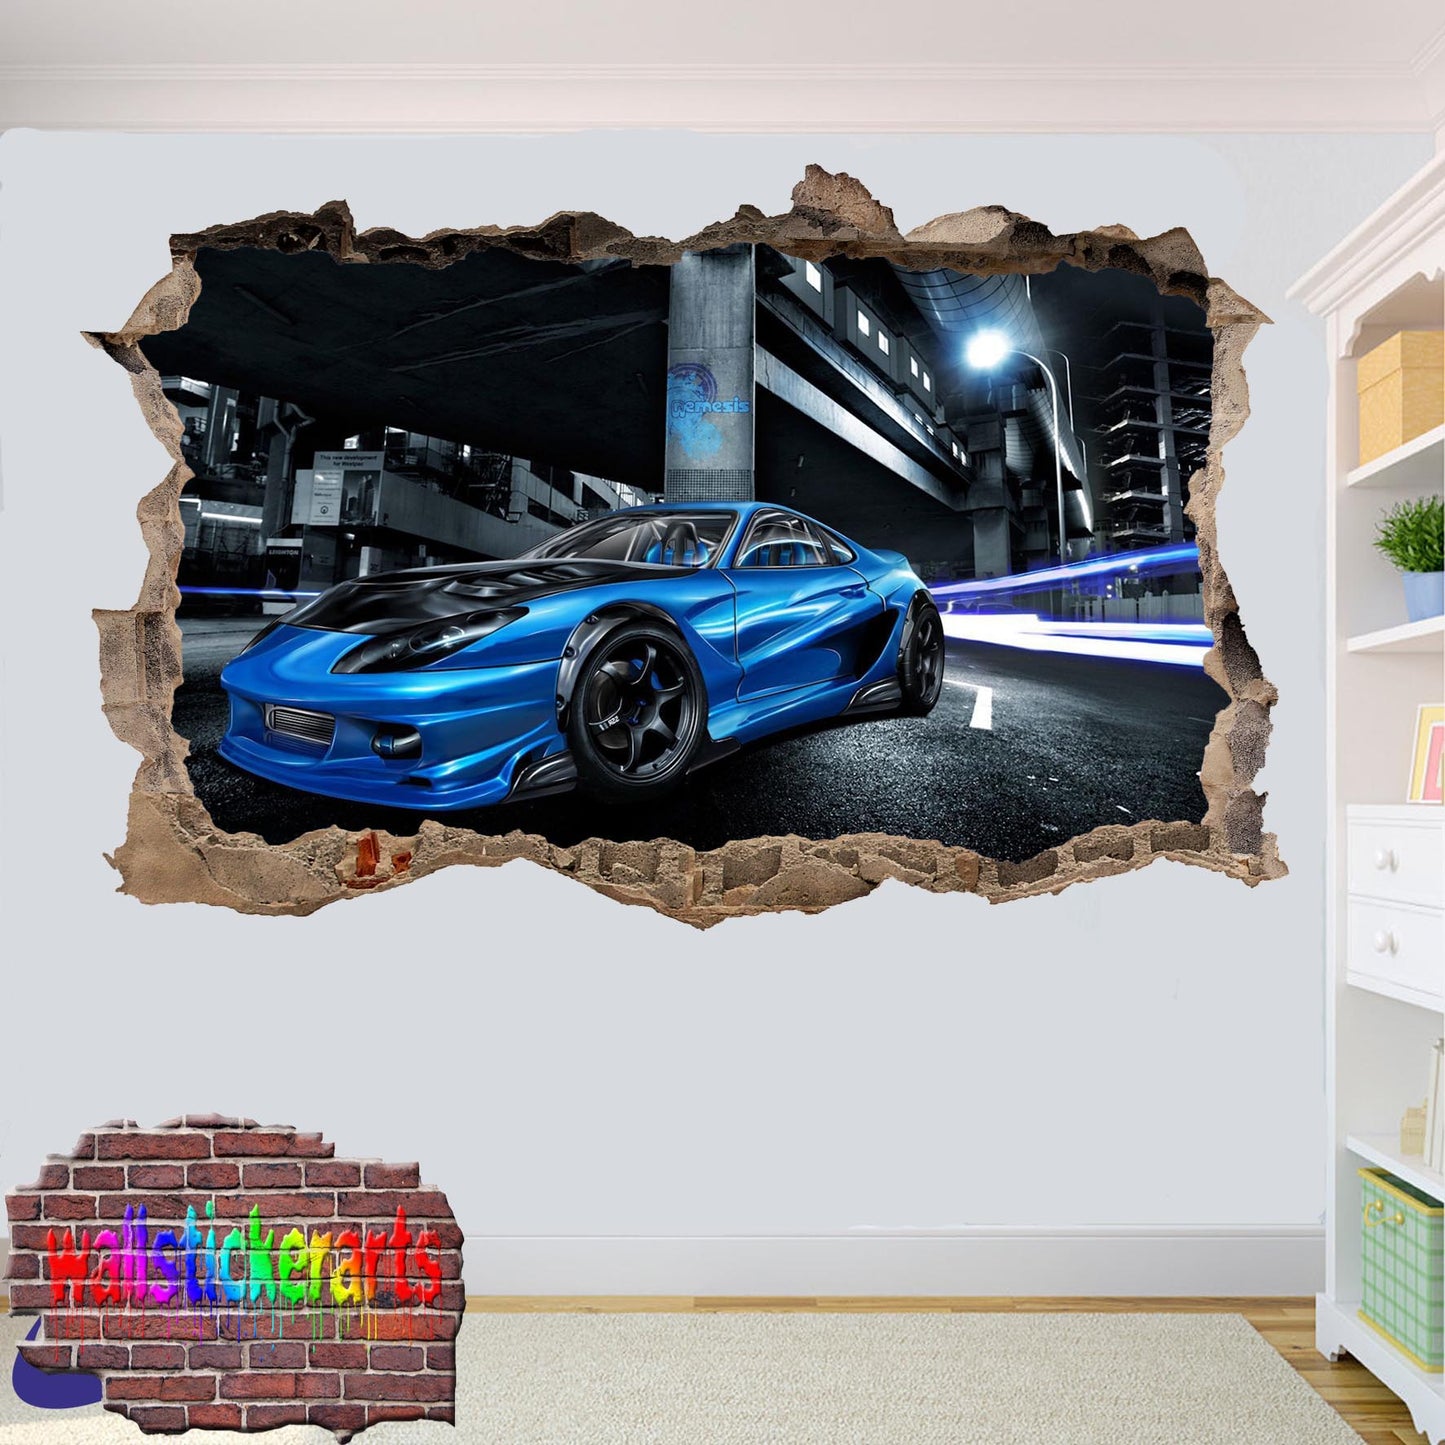 POWERFUL BLUE SPORTS CAR WALL STICKER mural decal poster